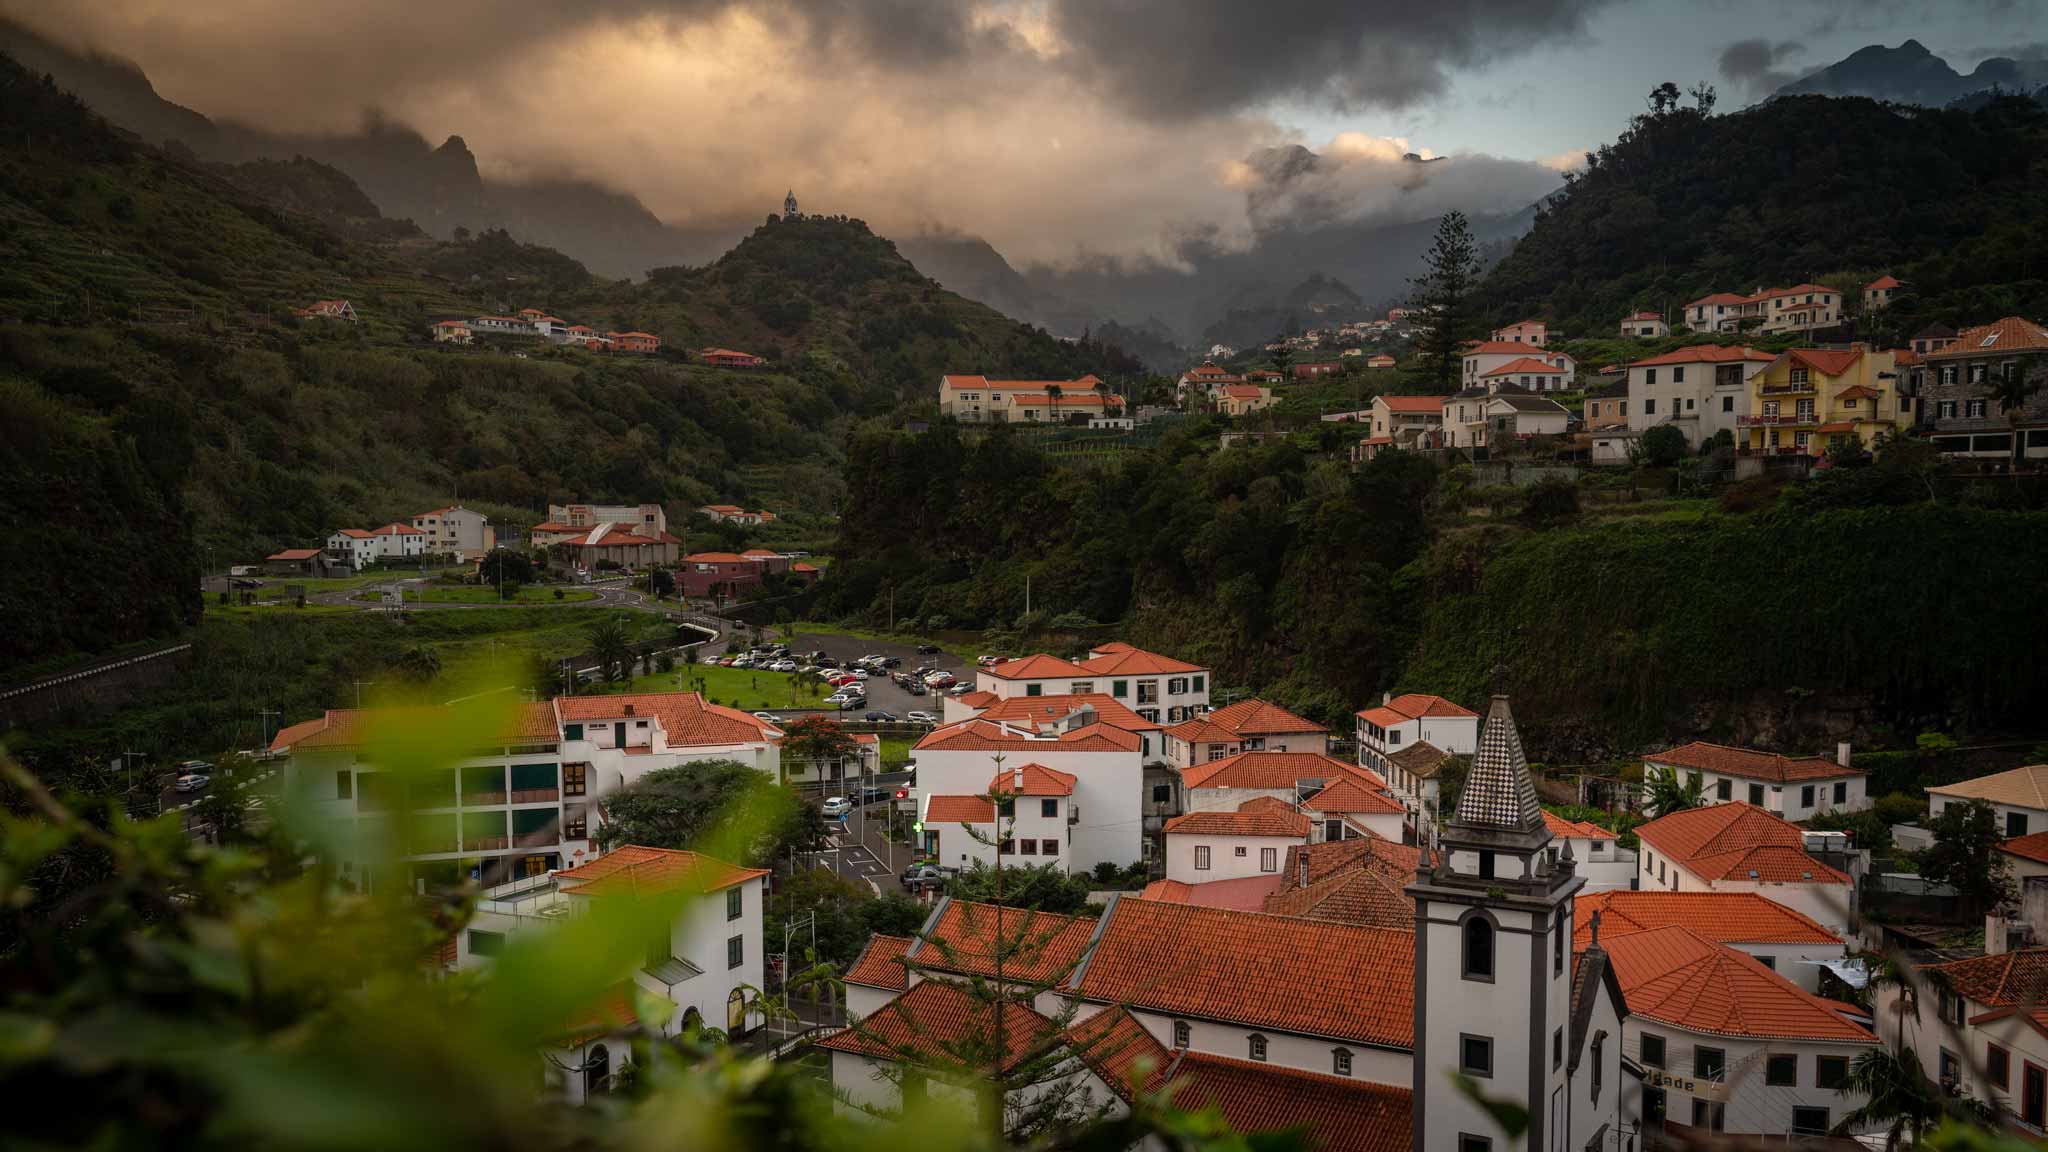 The municipality of Sao Vicente seen at sunset, with clouds floating around the mountains surrounding the town